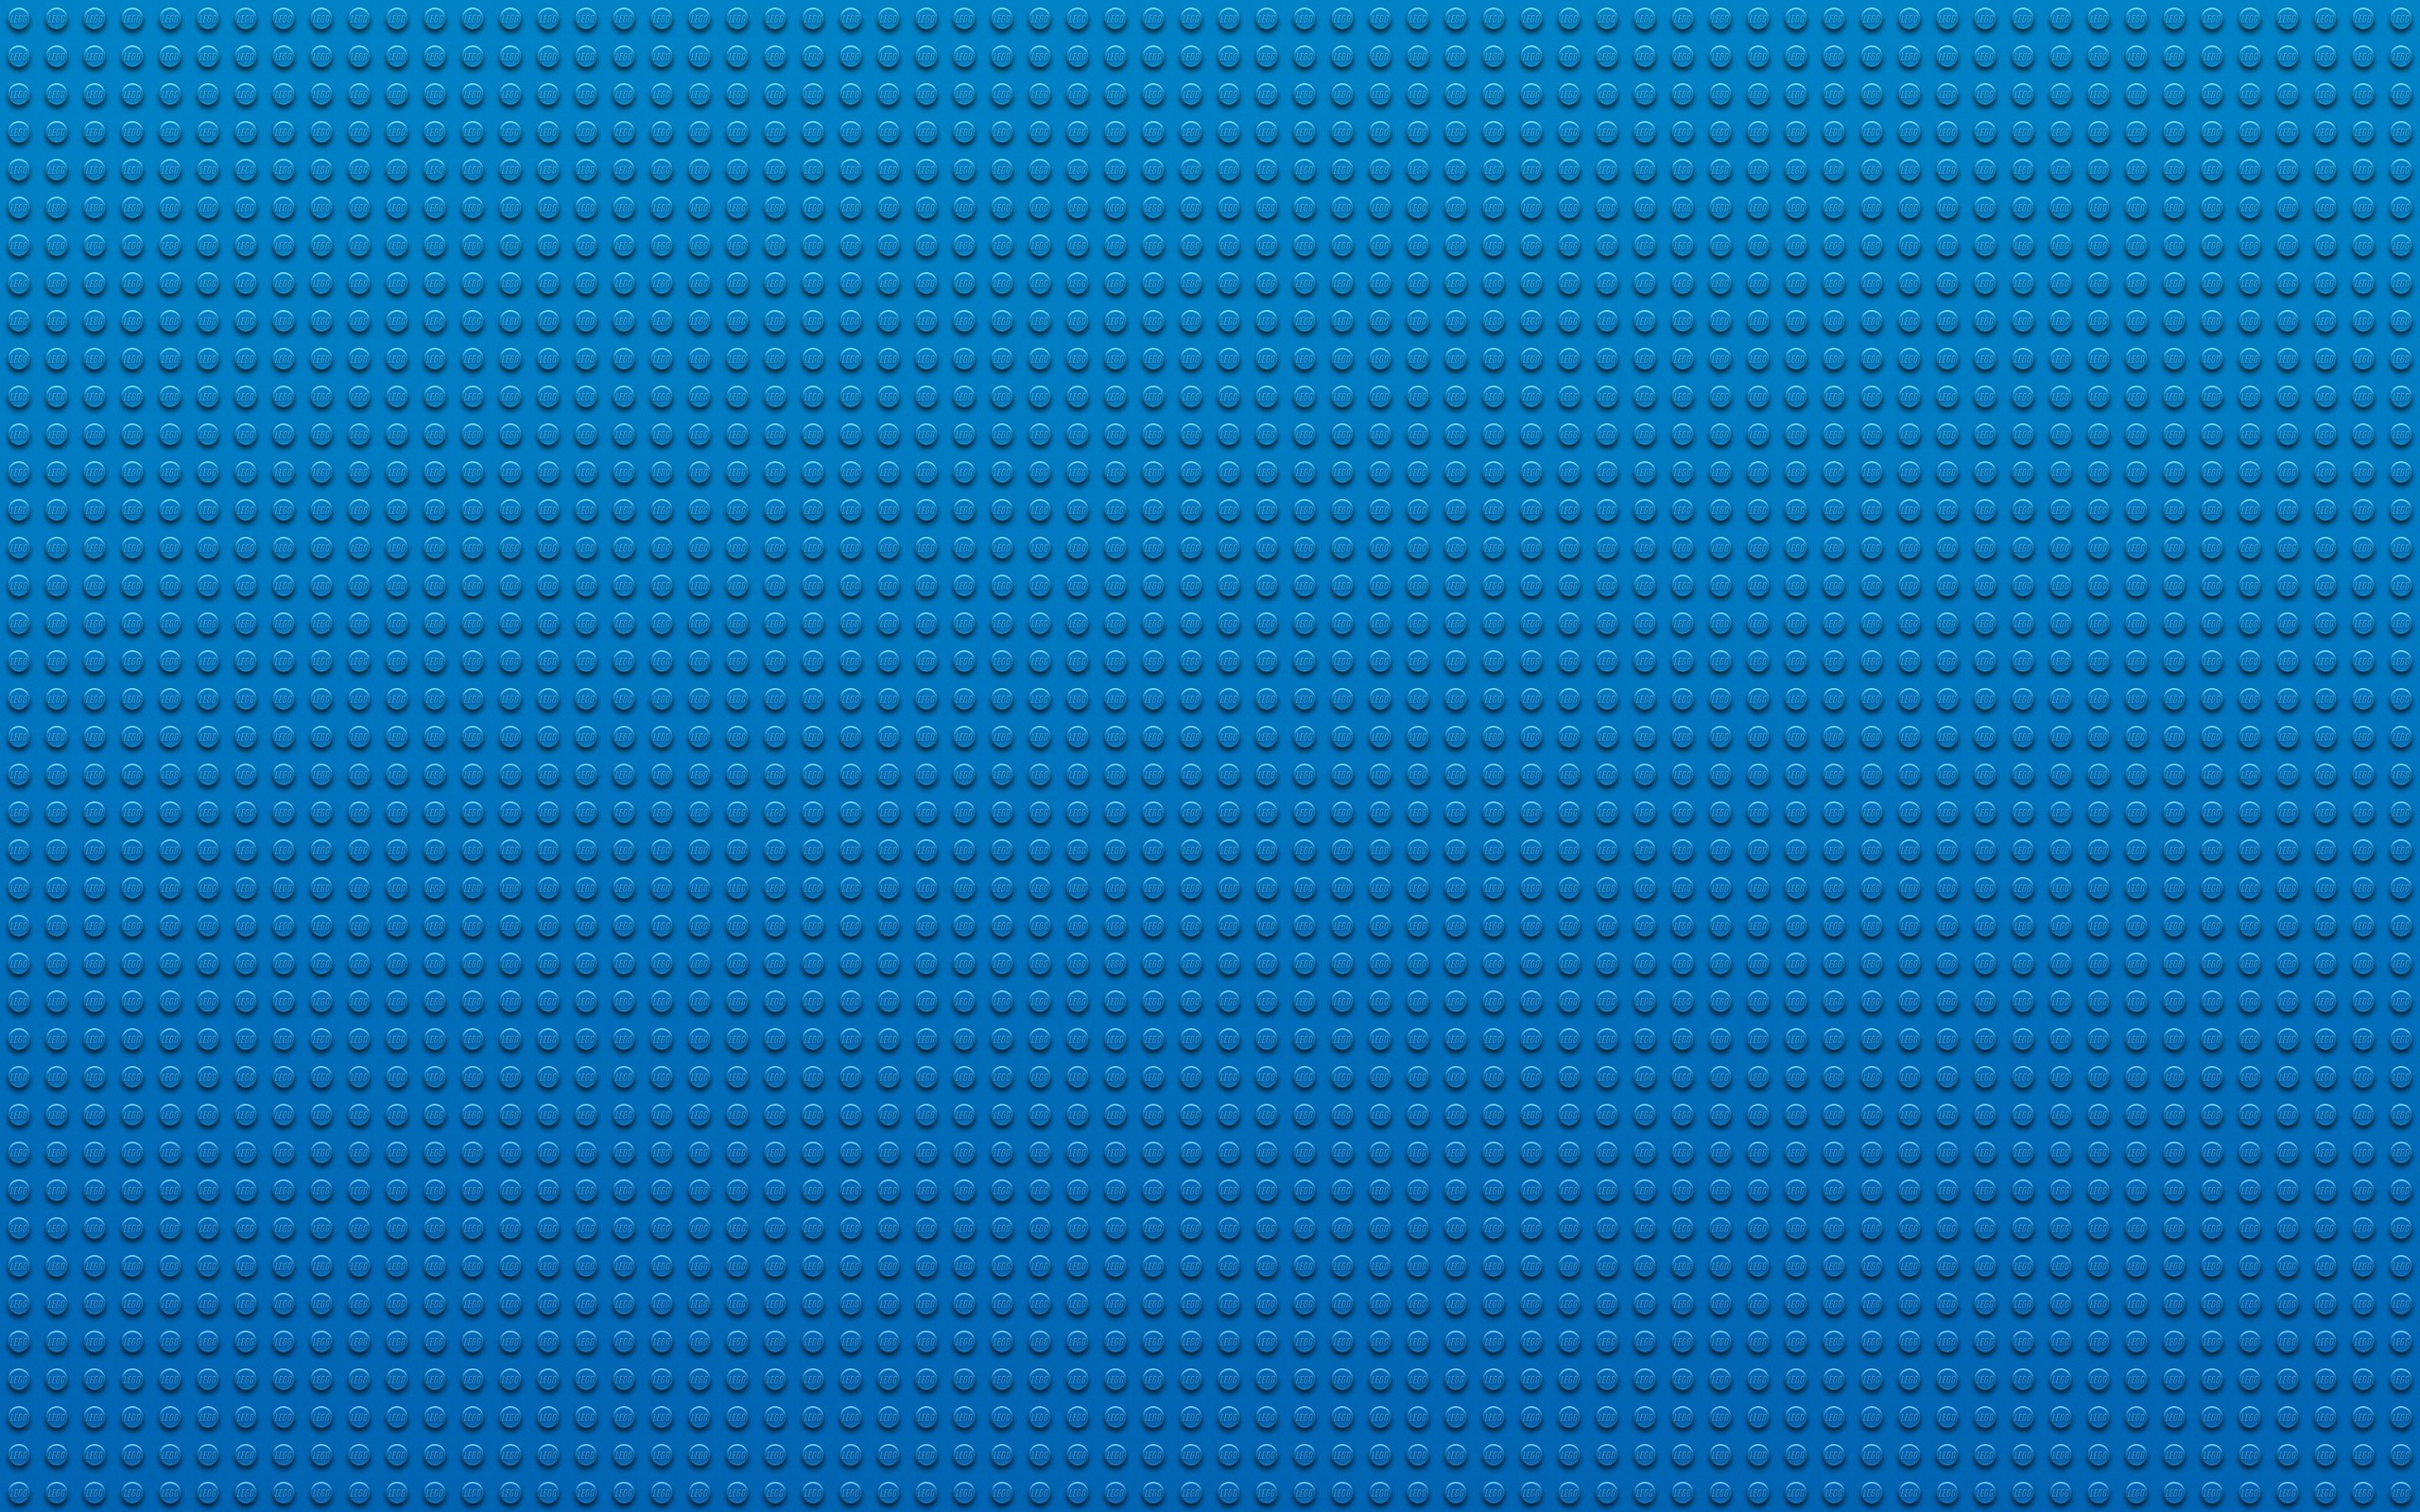 Man Made Lego HD Wallpaper | Background Image